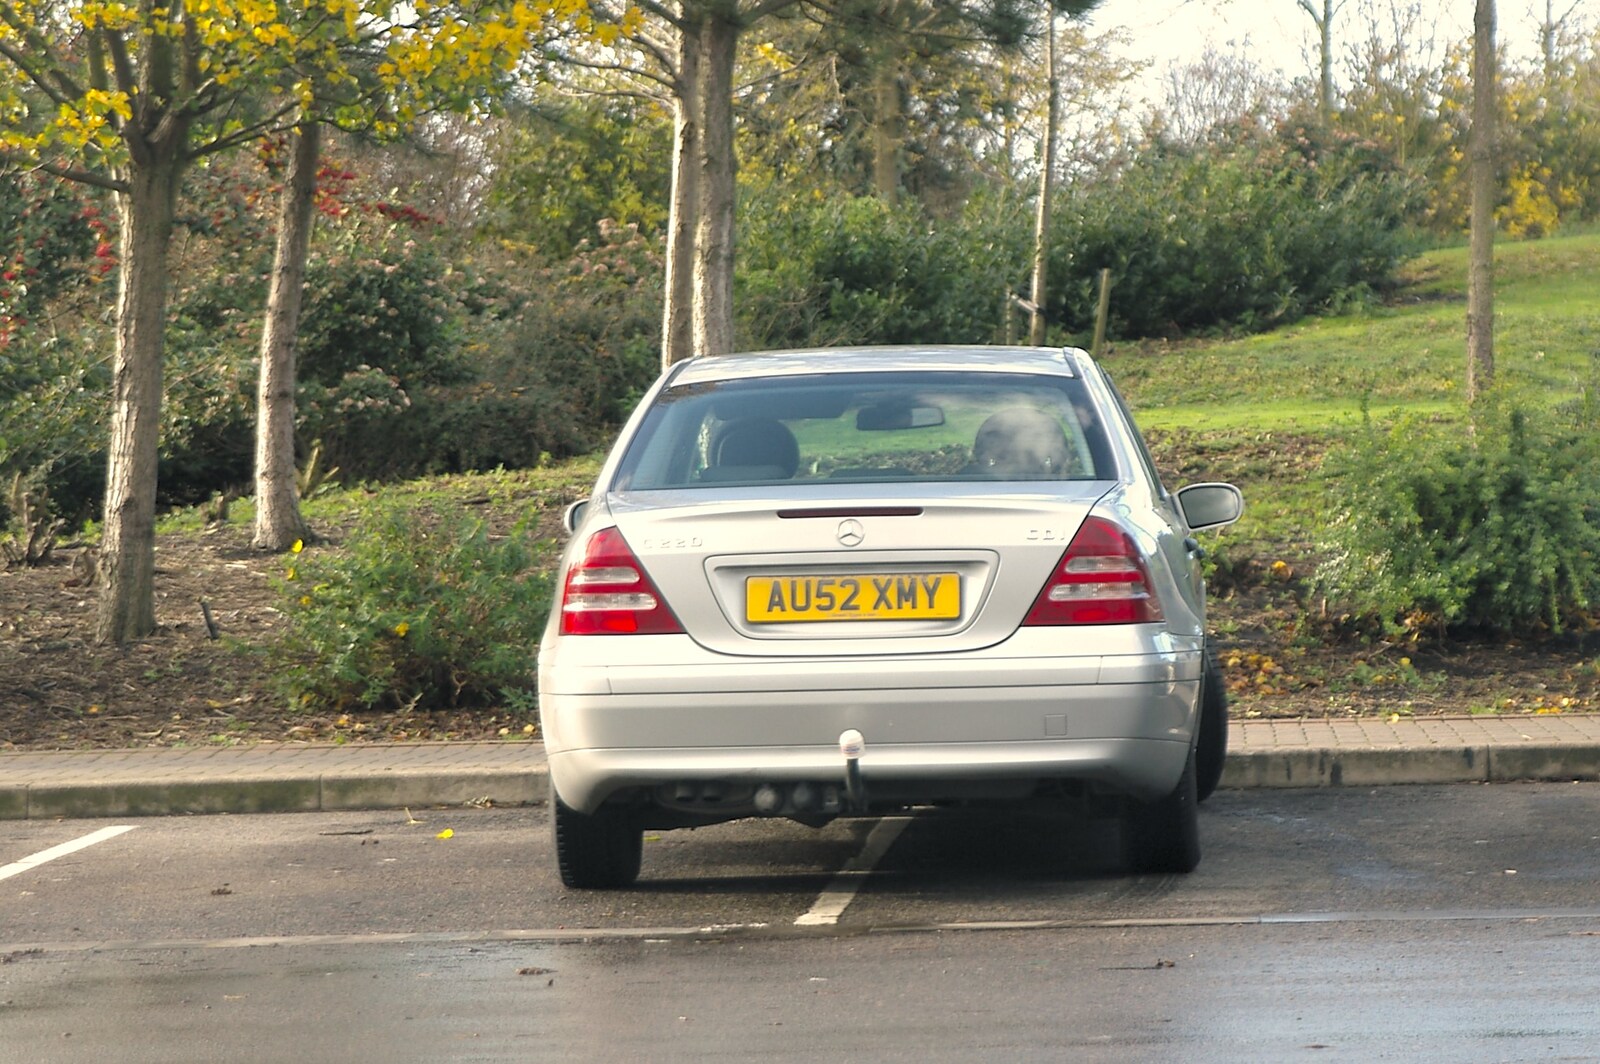 Typical fascist Mercedes parking from Qualcomm Christmas, The BBs and Isobel Moves Flats, Cambridge and Ascot, Berkshire - 2nd December 2006